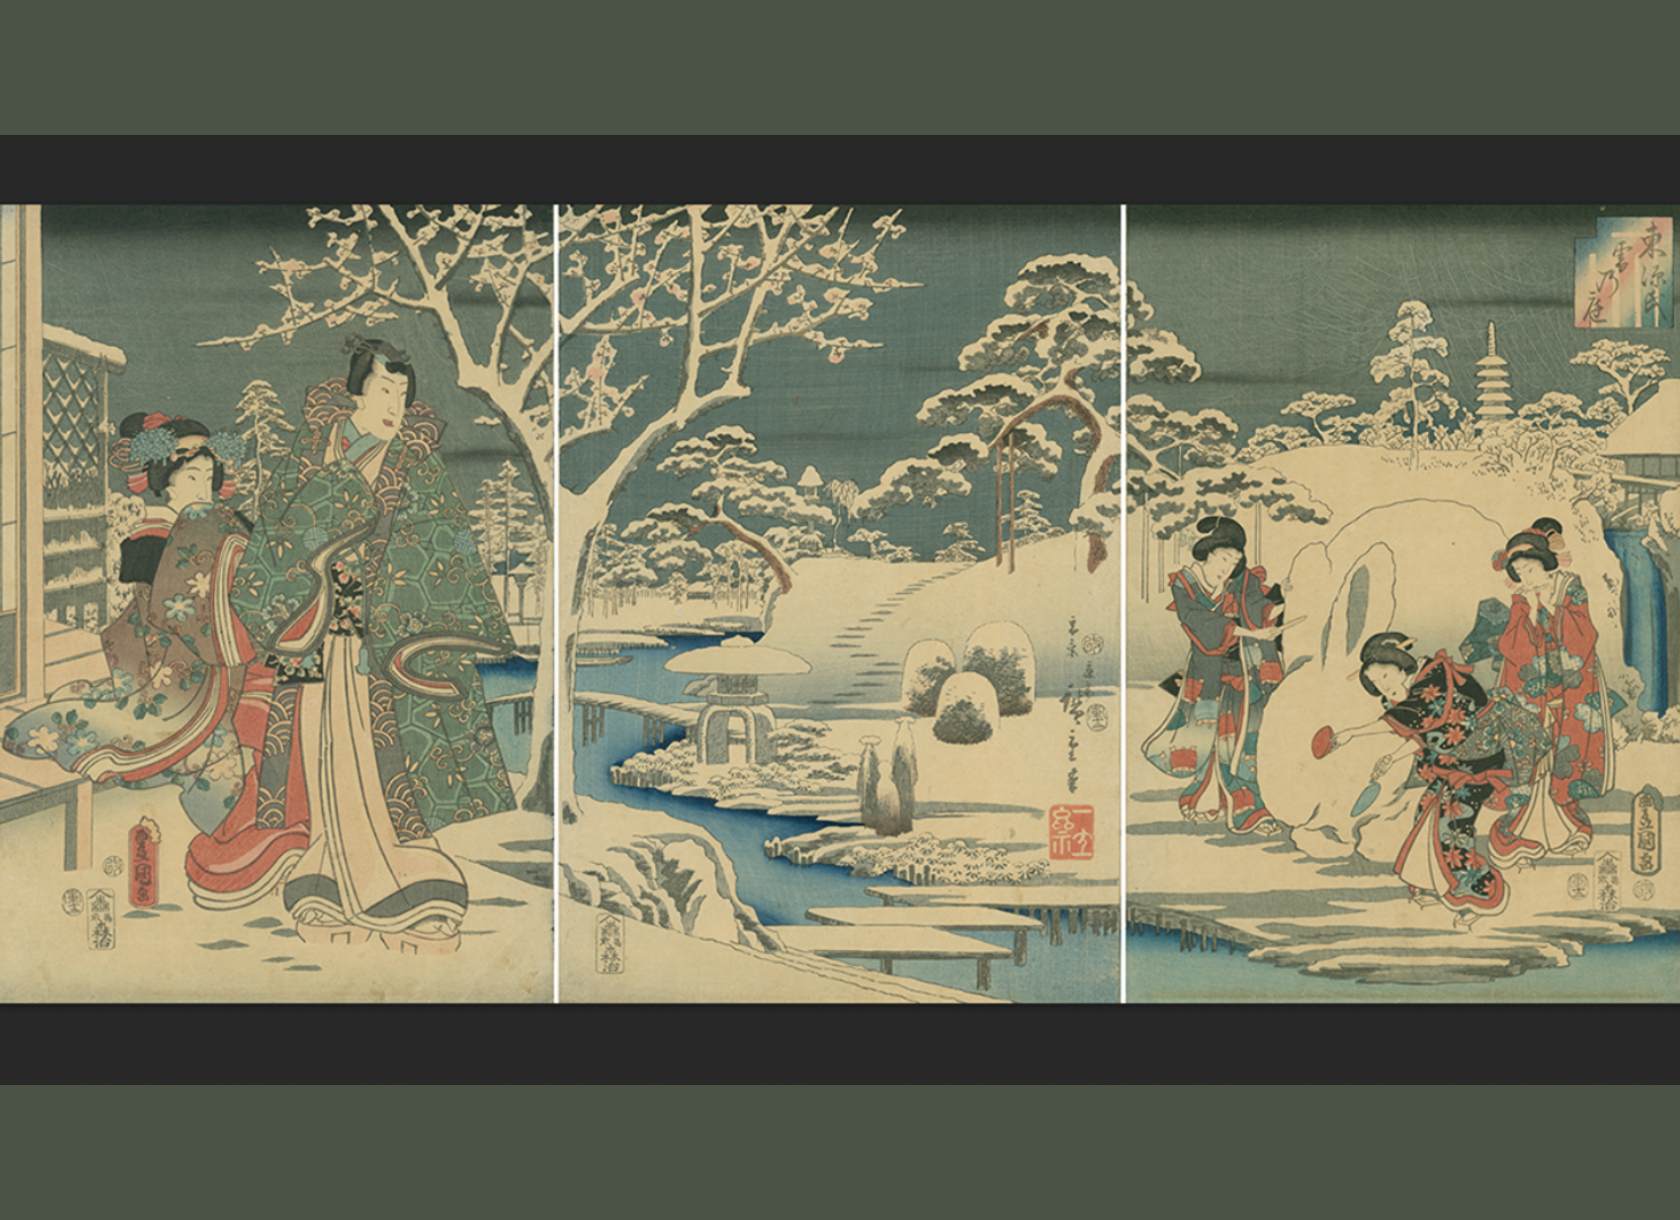 Image from Shiki: The Four Seasons, part of Scripps College's permanent art collection